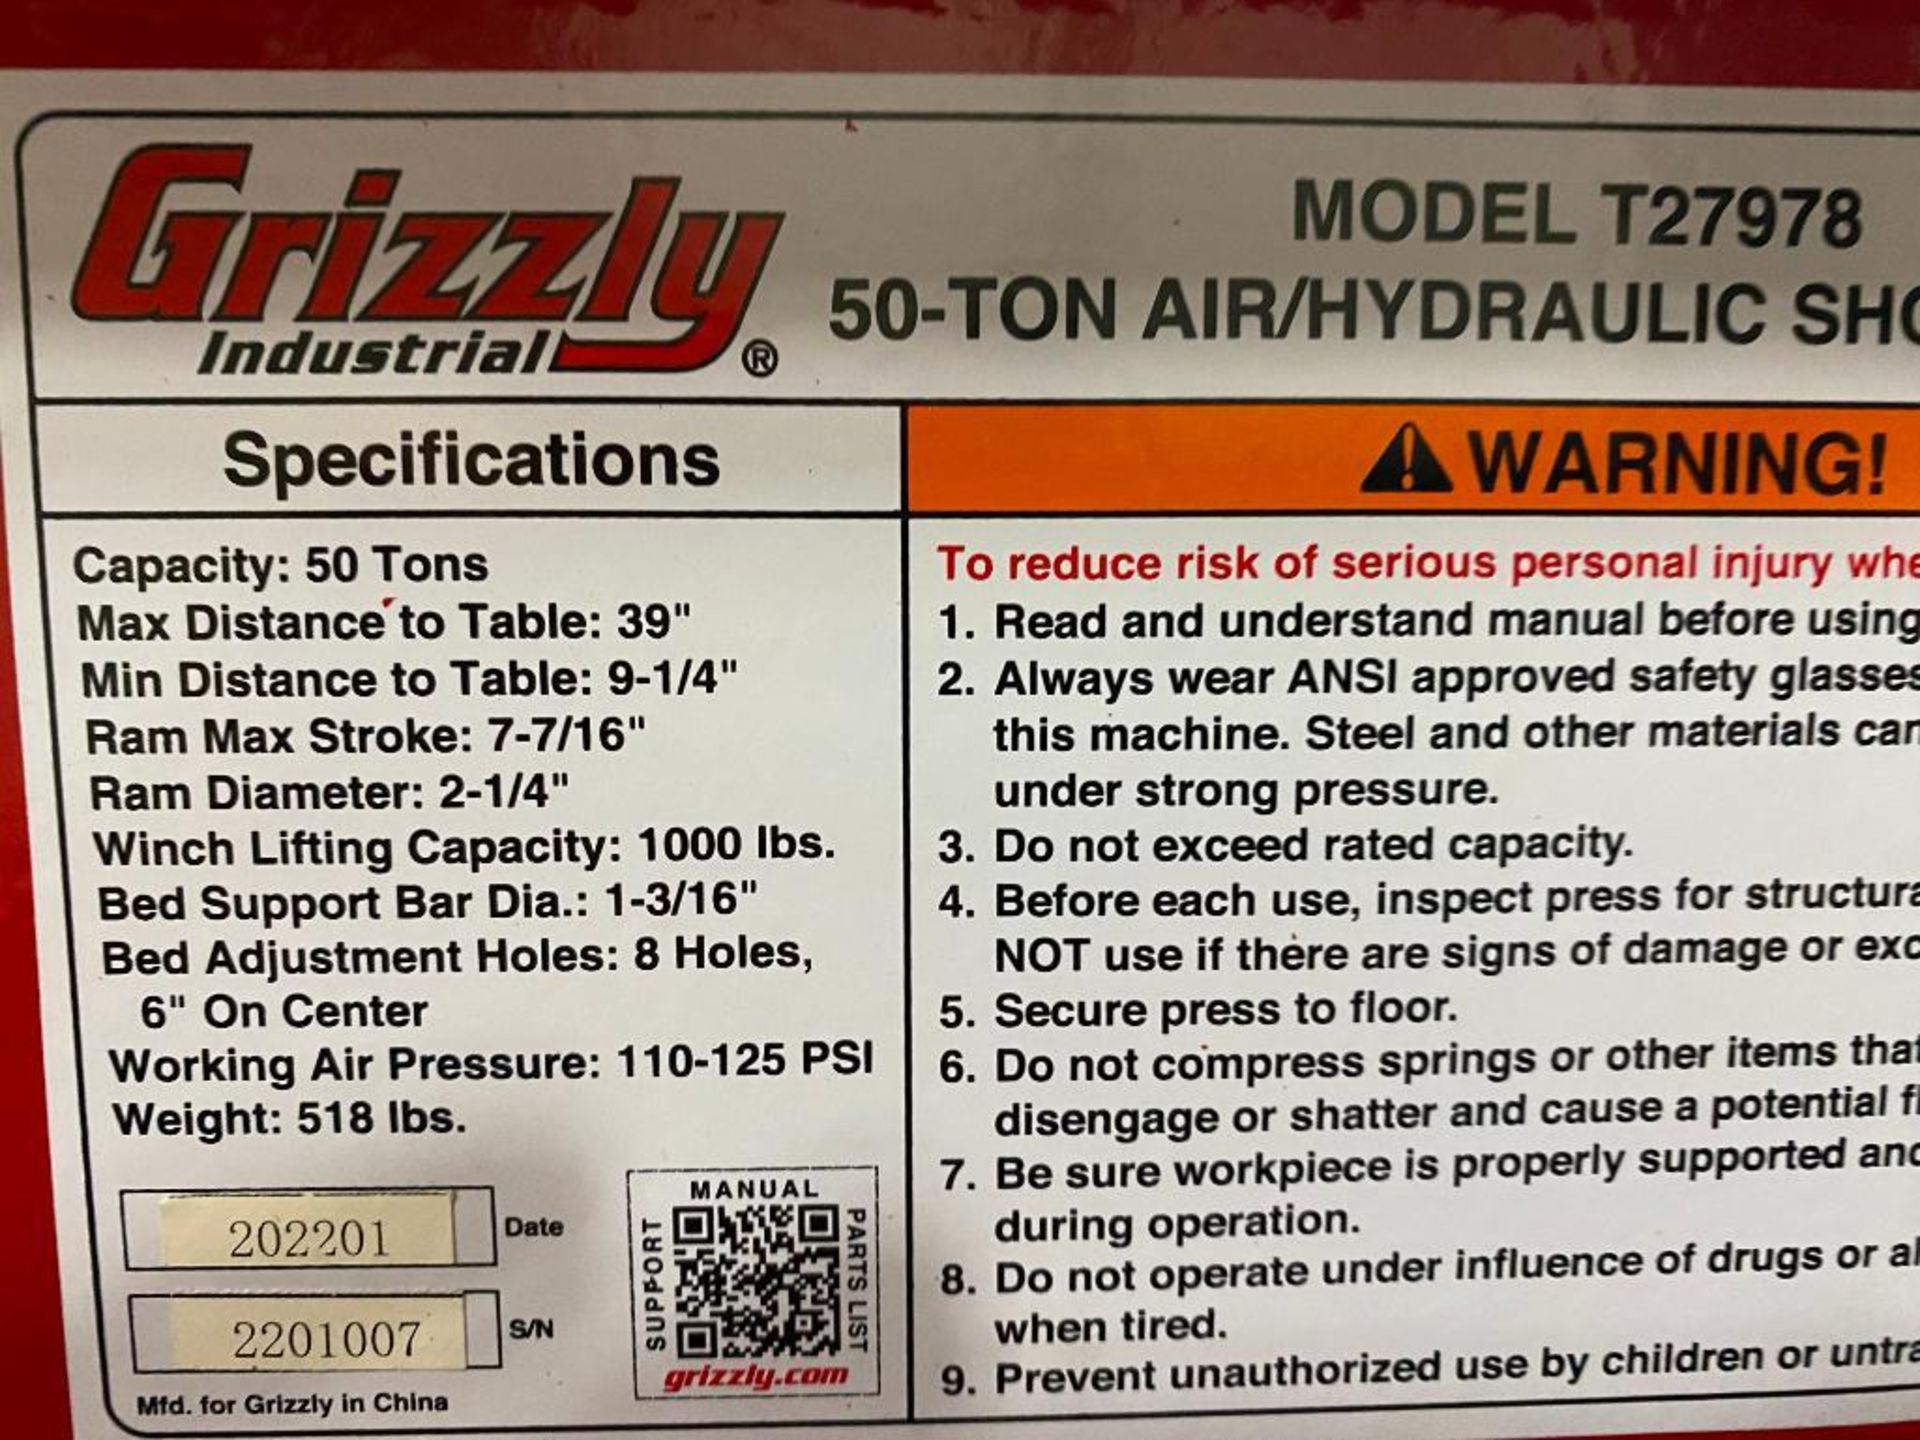 2022 Grizzly 50-Ton Air/Hydraulic H-Frame Shop Press, Model T27978, S/N 2201007 - Image 2 of 2